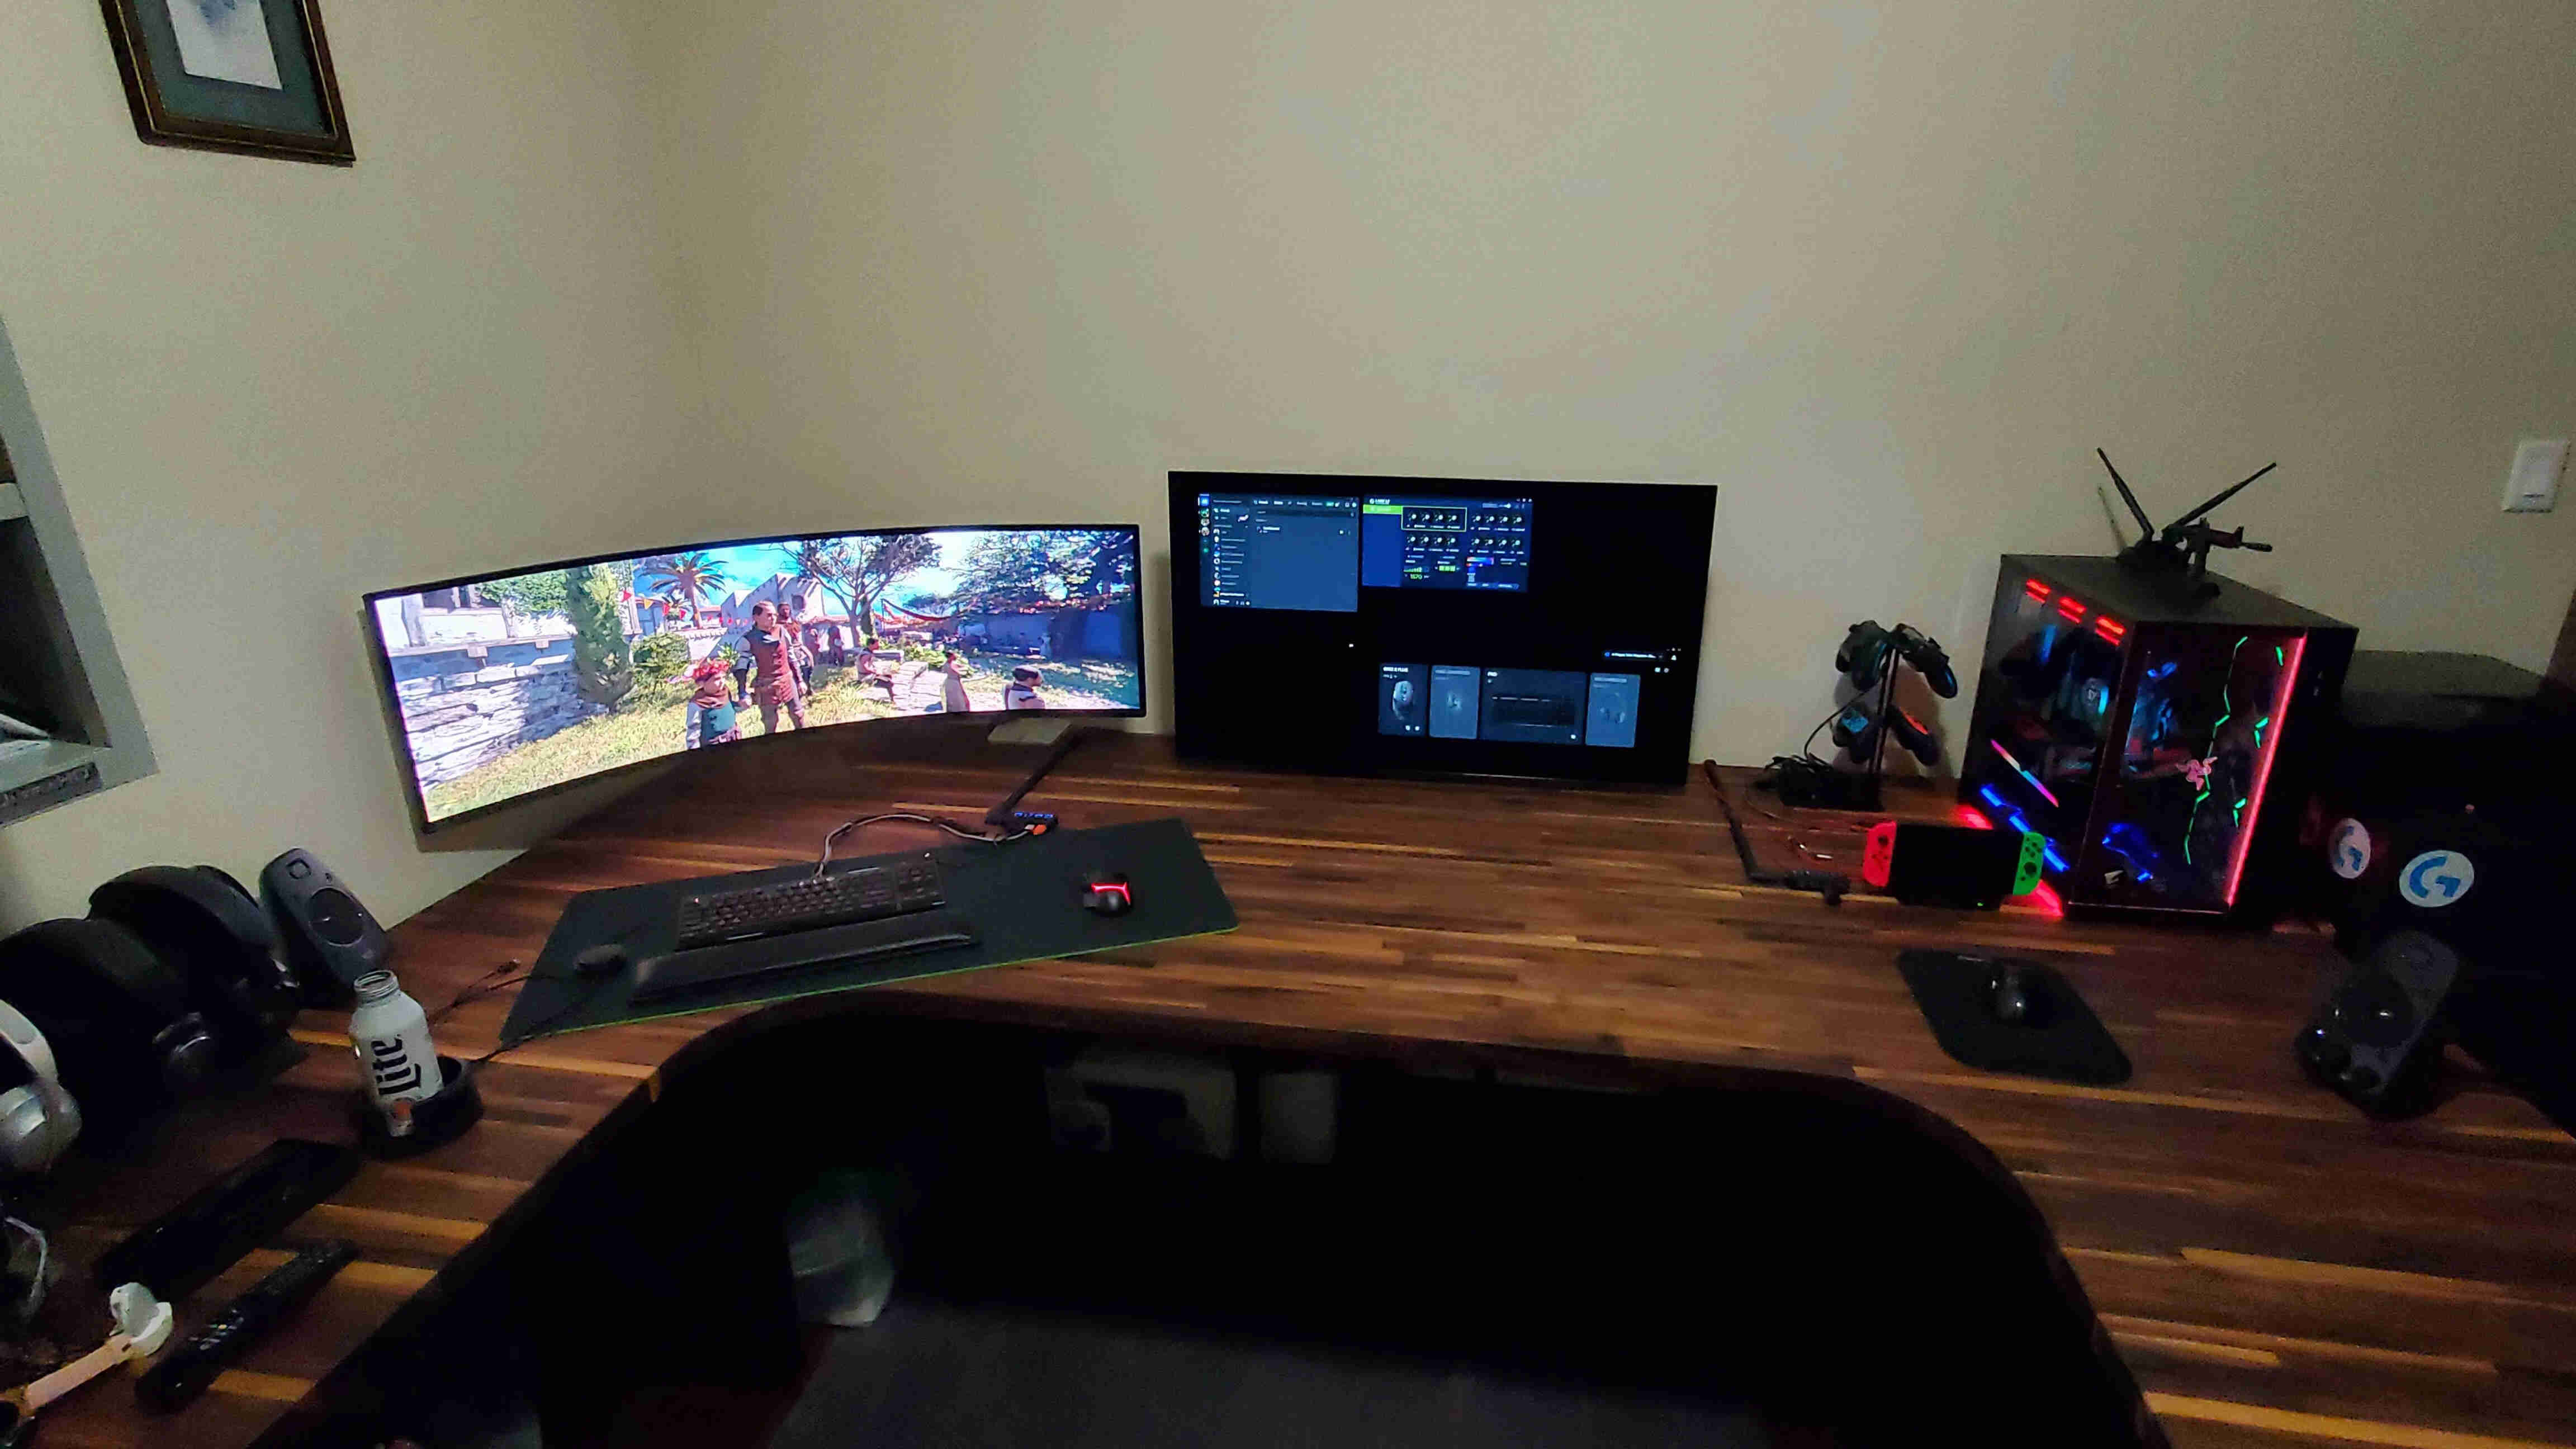 Paragon Gaming Desk: How Long To Set Up